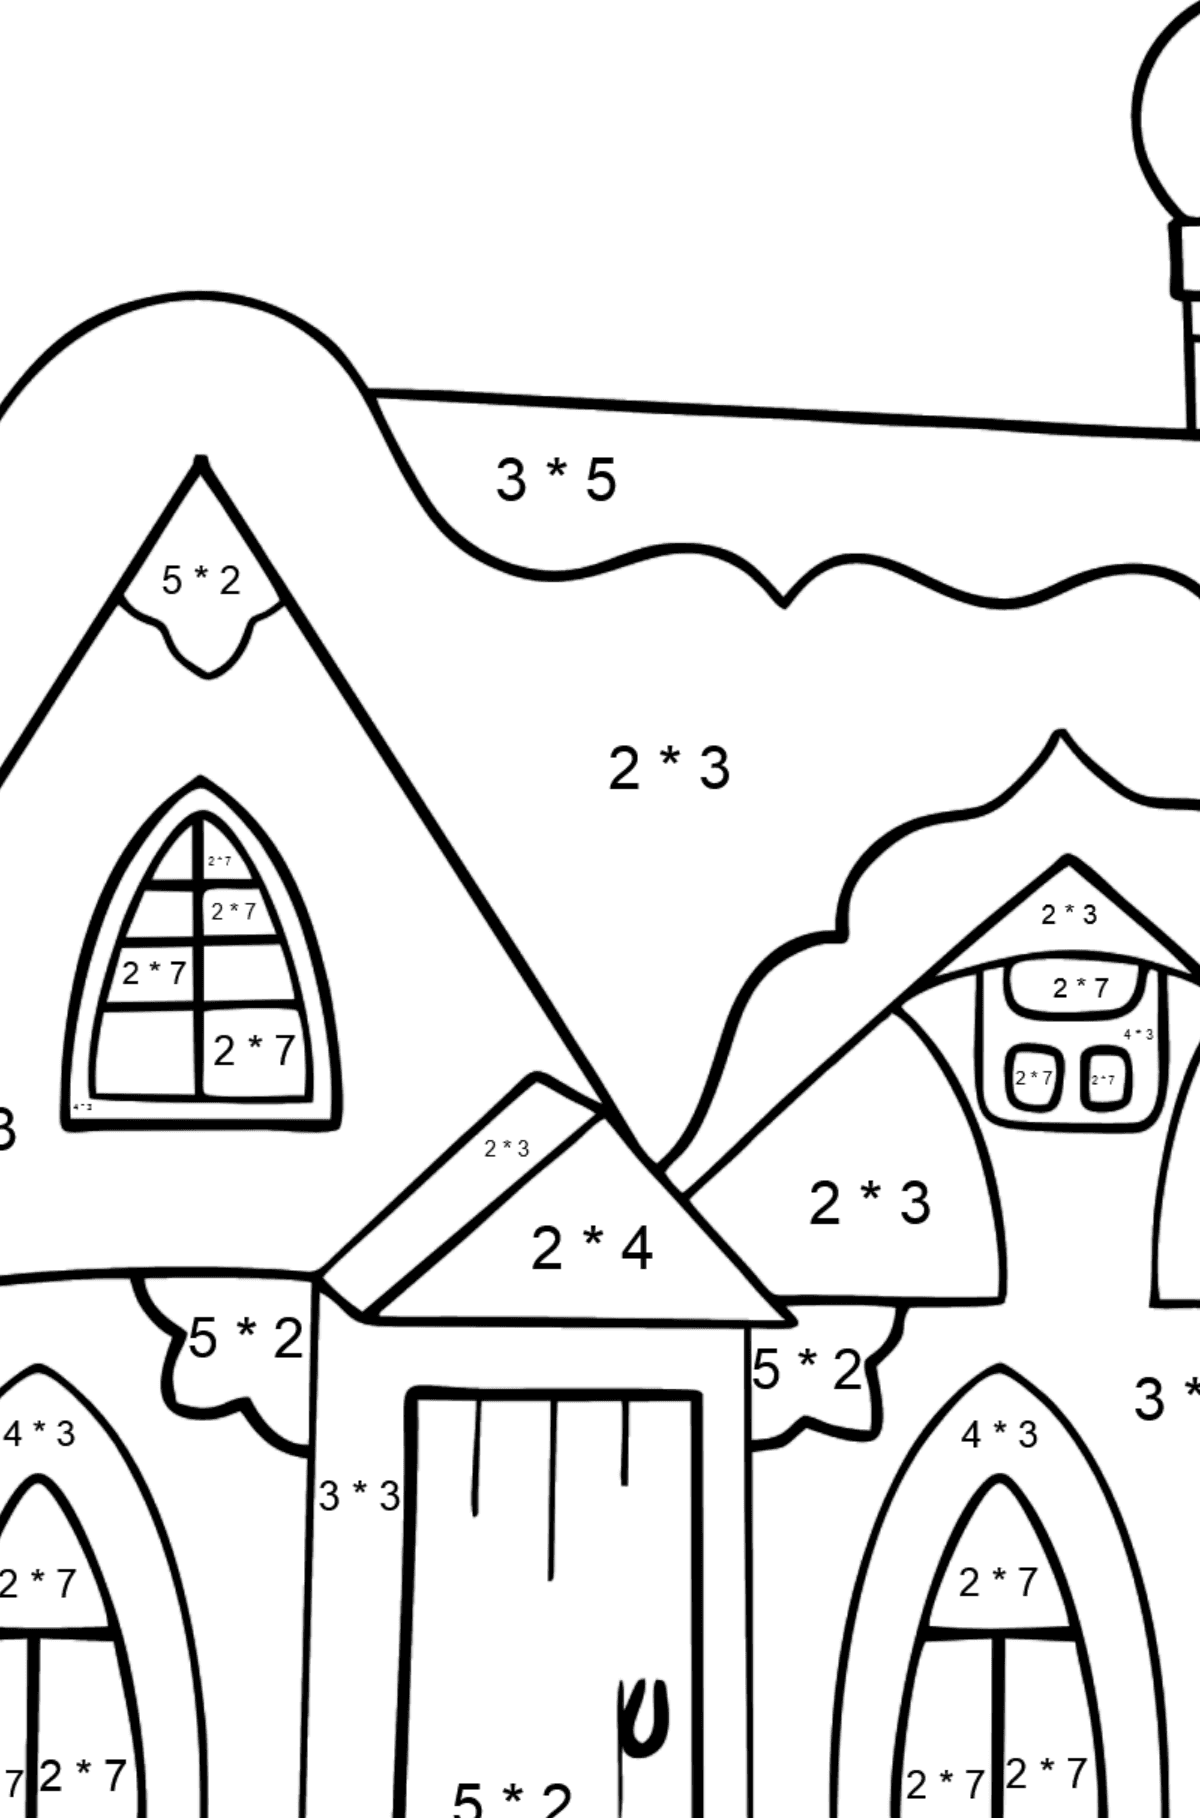 Complex Coloring Page - A Fairytale House - Math Coloring - Multiplication for Kids